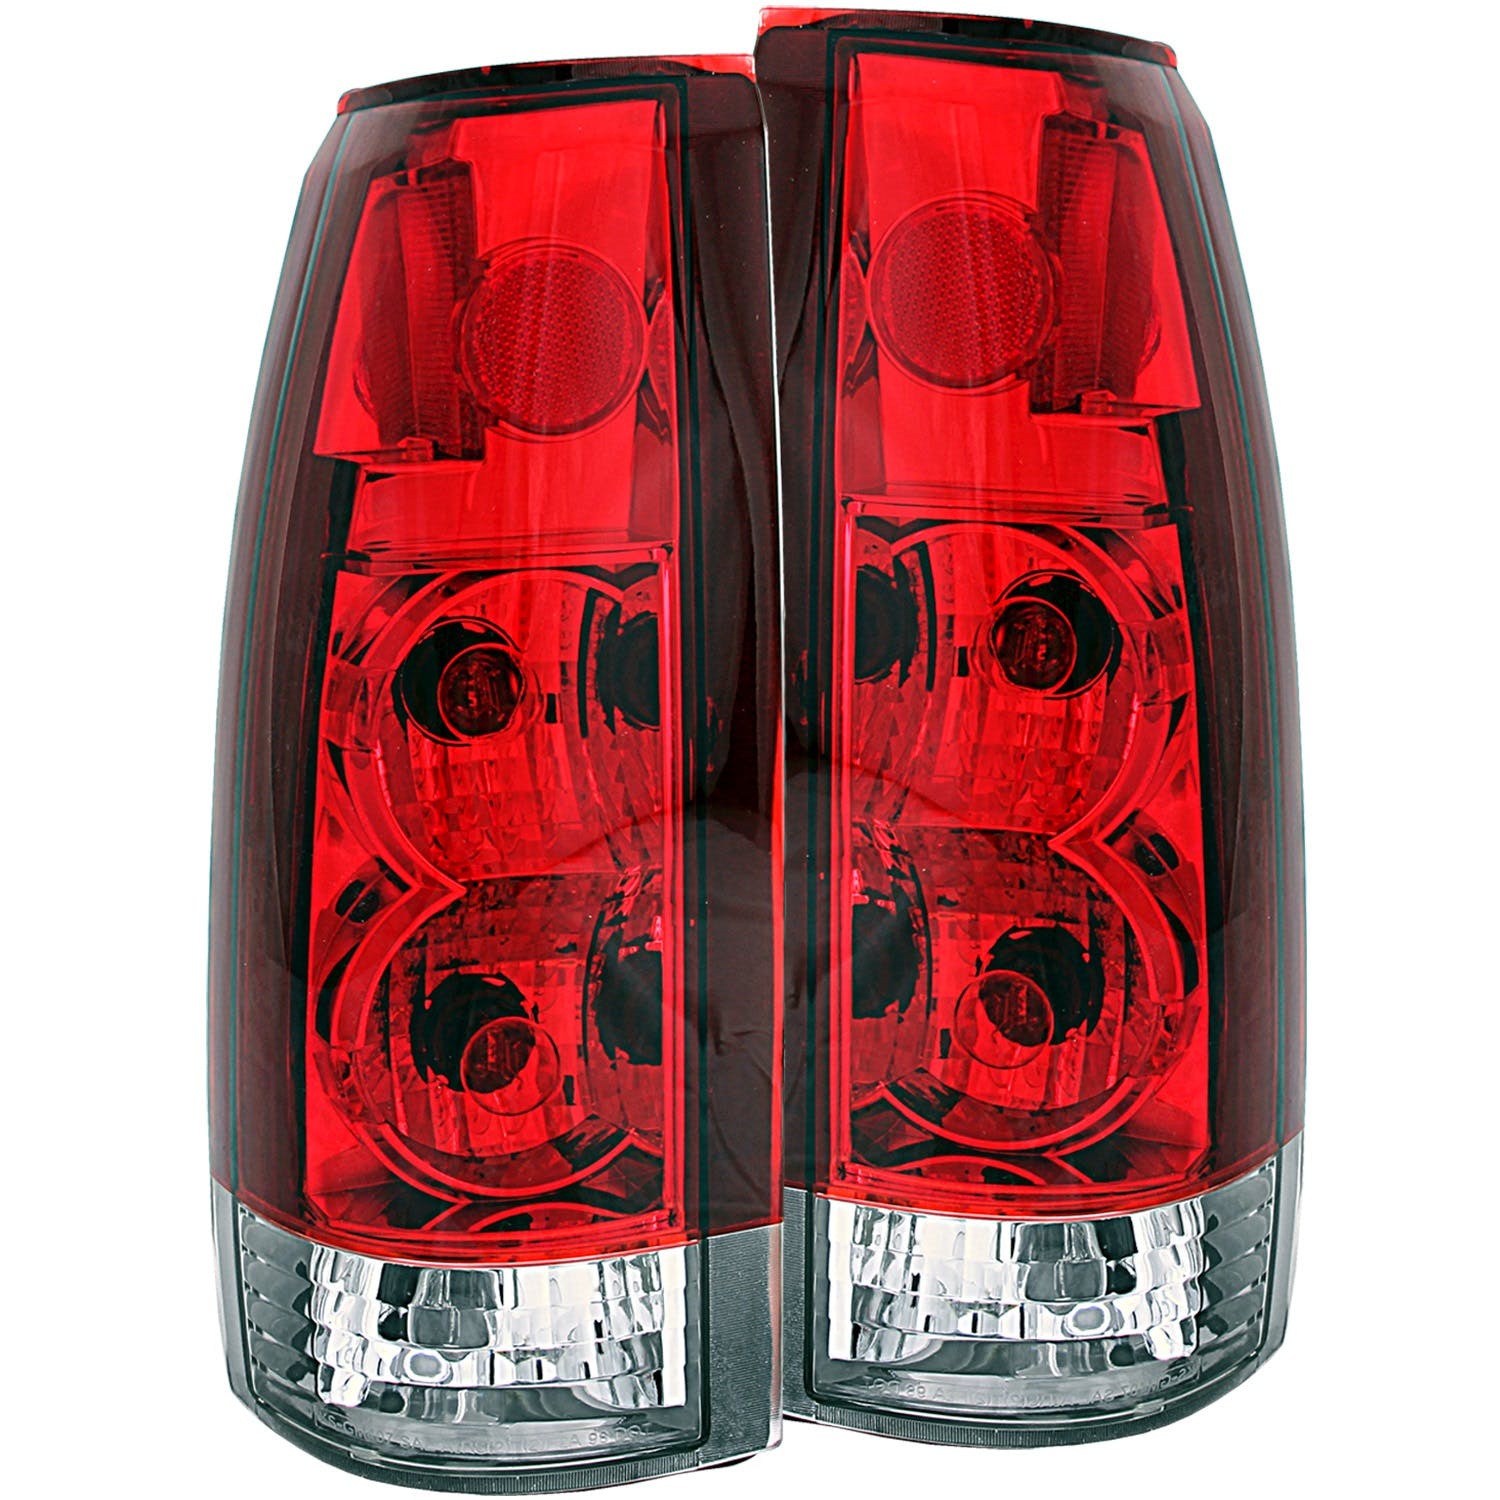 AnzoUSA 211140 Taillights Red/Clear - New Gen